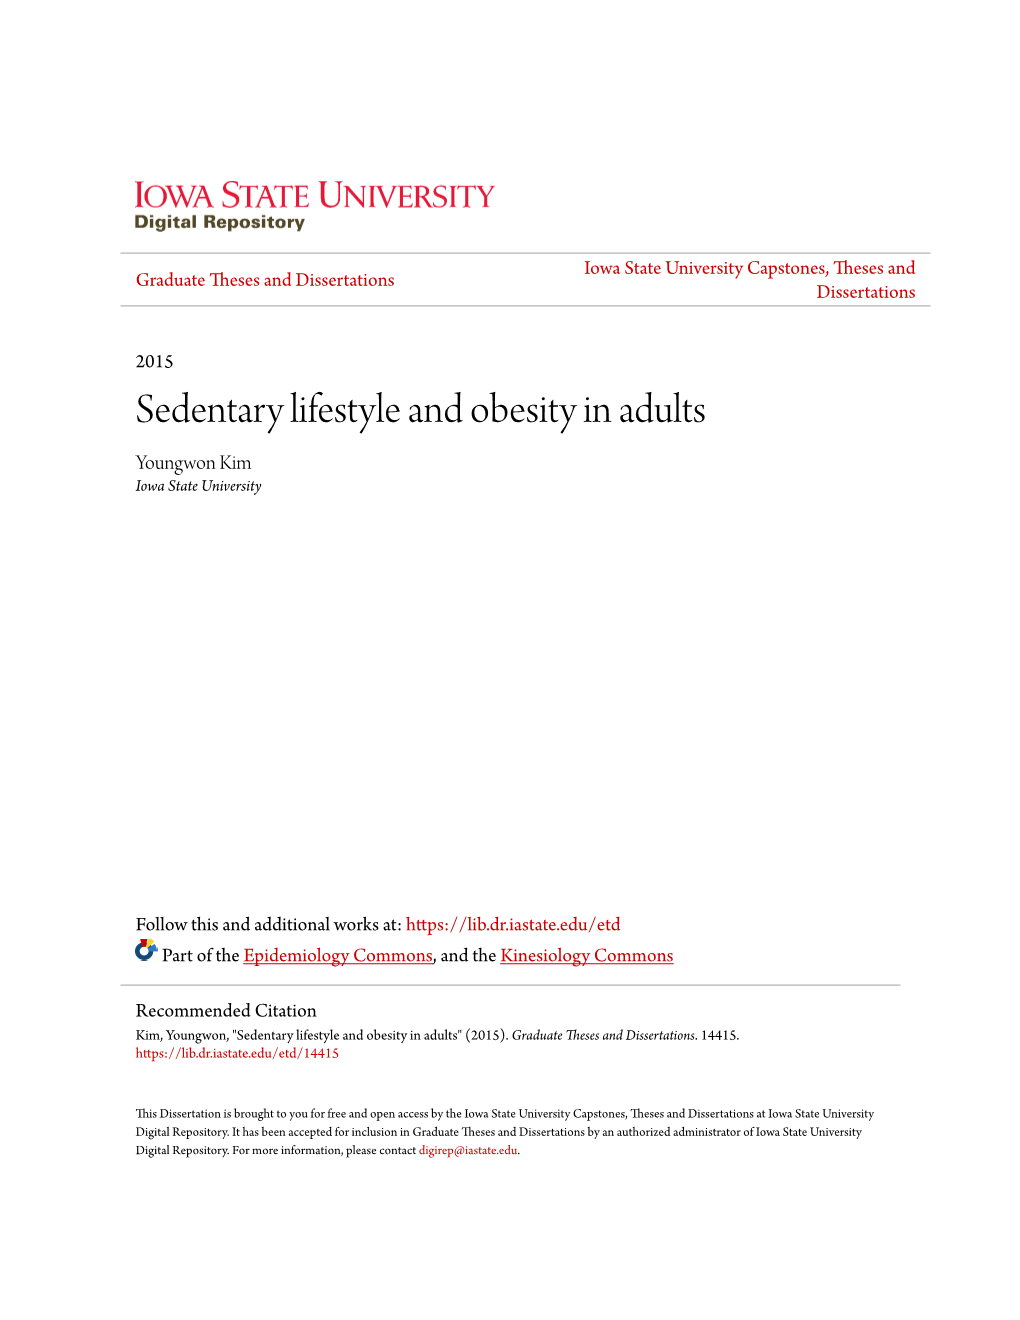 Sedentary Lifestyle and Obesity in Adults Youngwon Kim Iowa State University